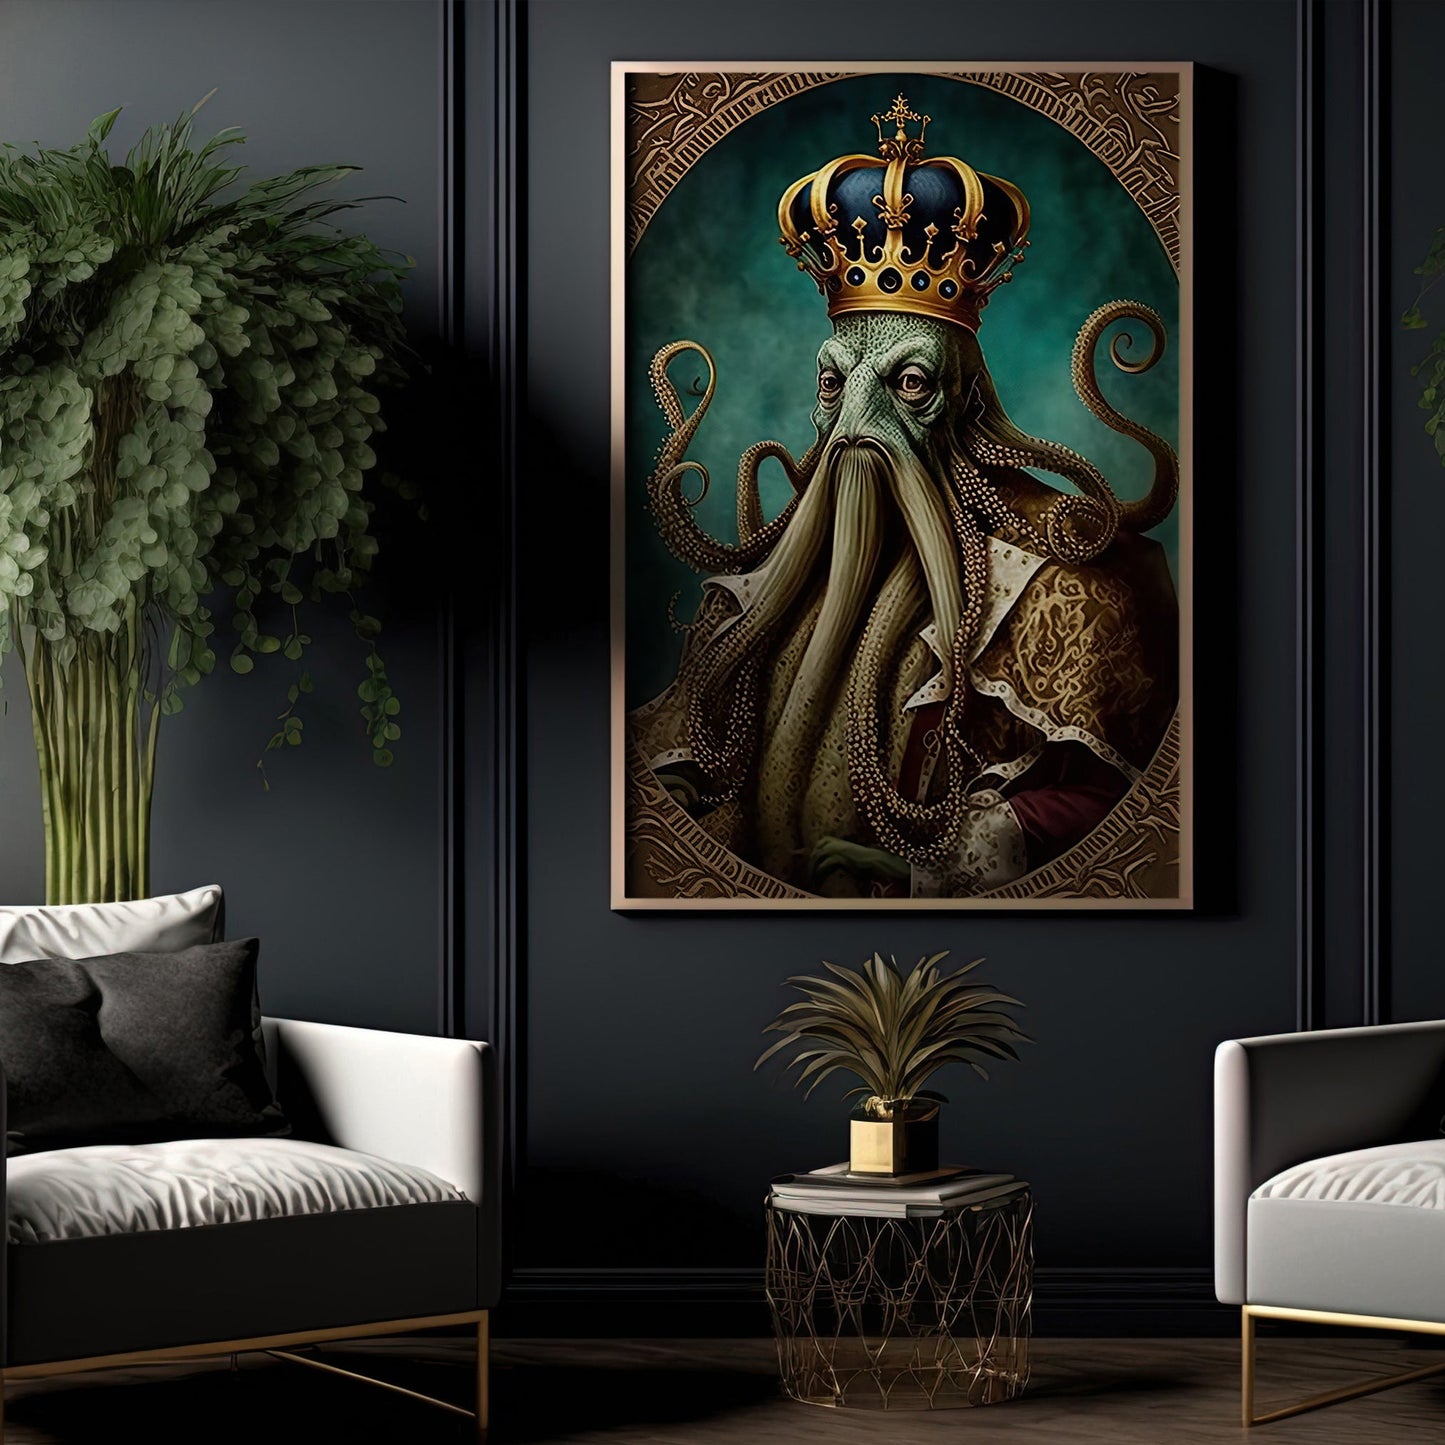 Victorian Octopus Canvas Painting, Gothic Wall Art Decor - Modern Octopus Poster Gift